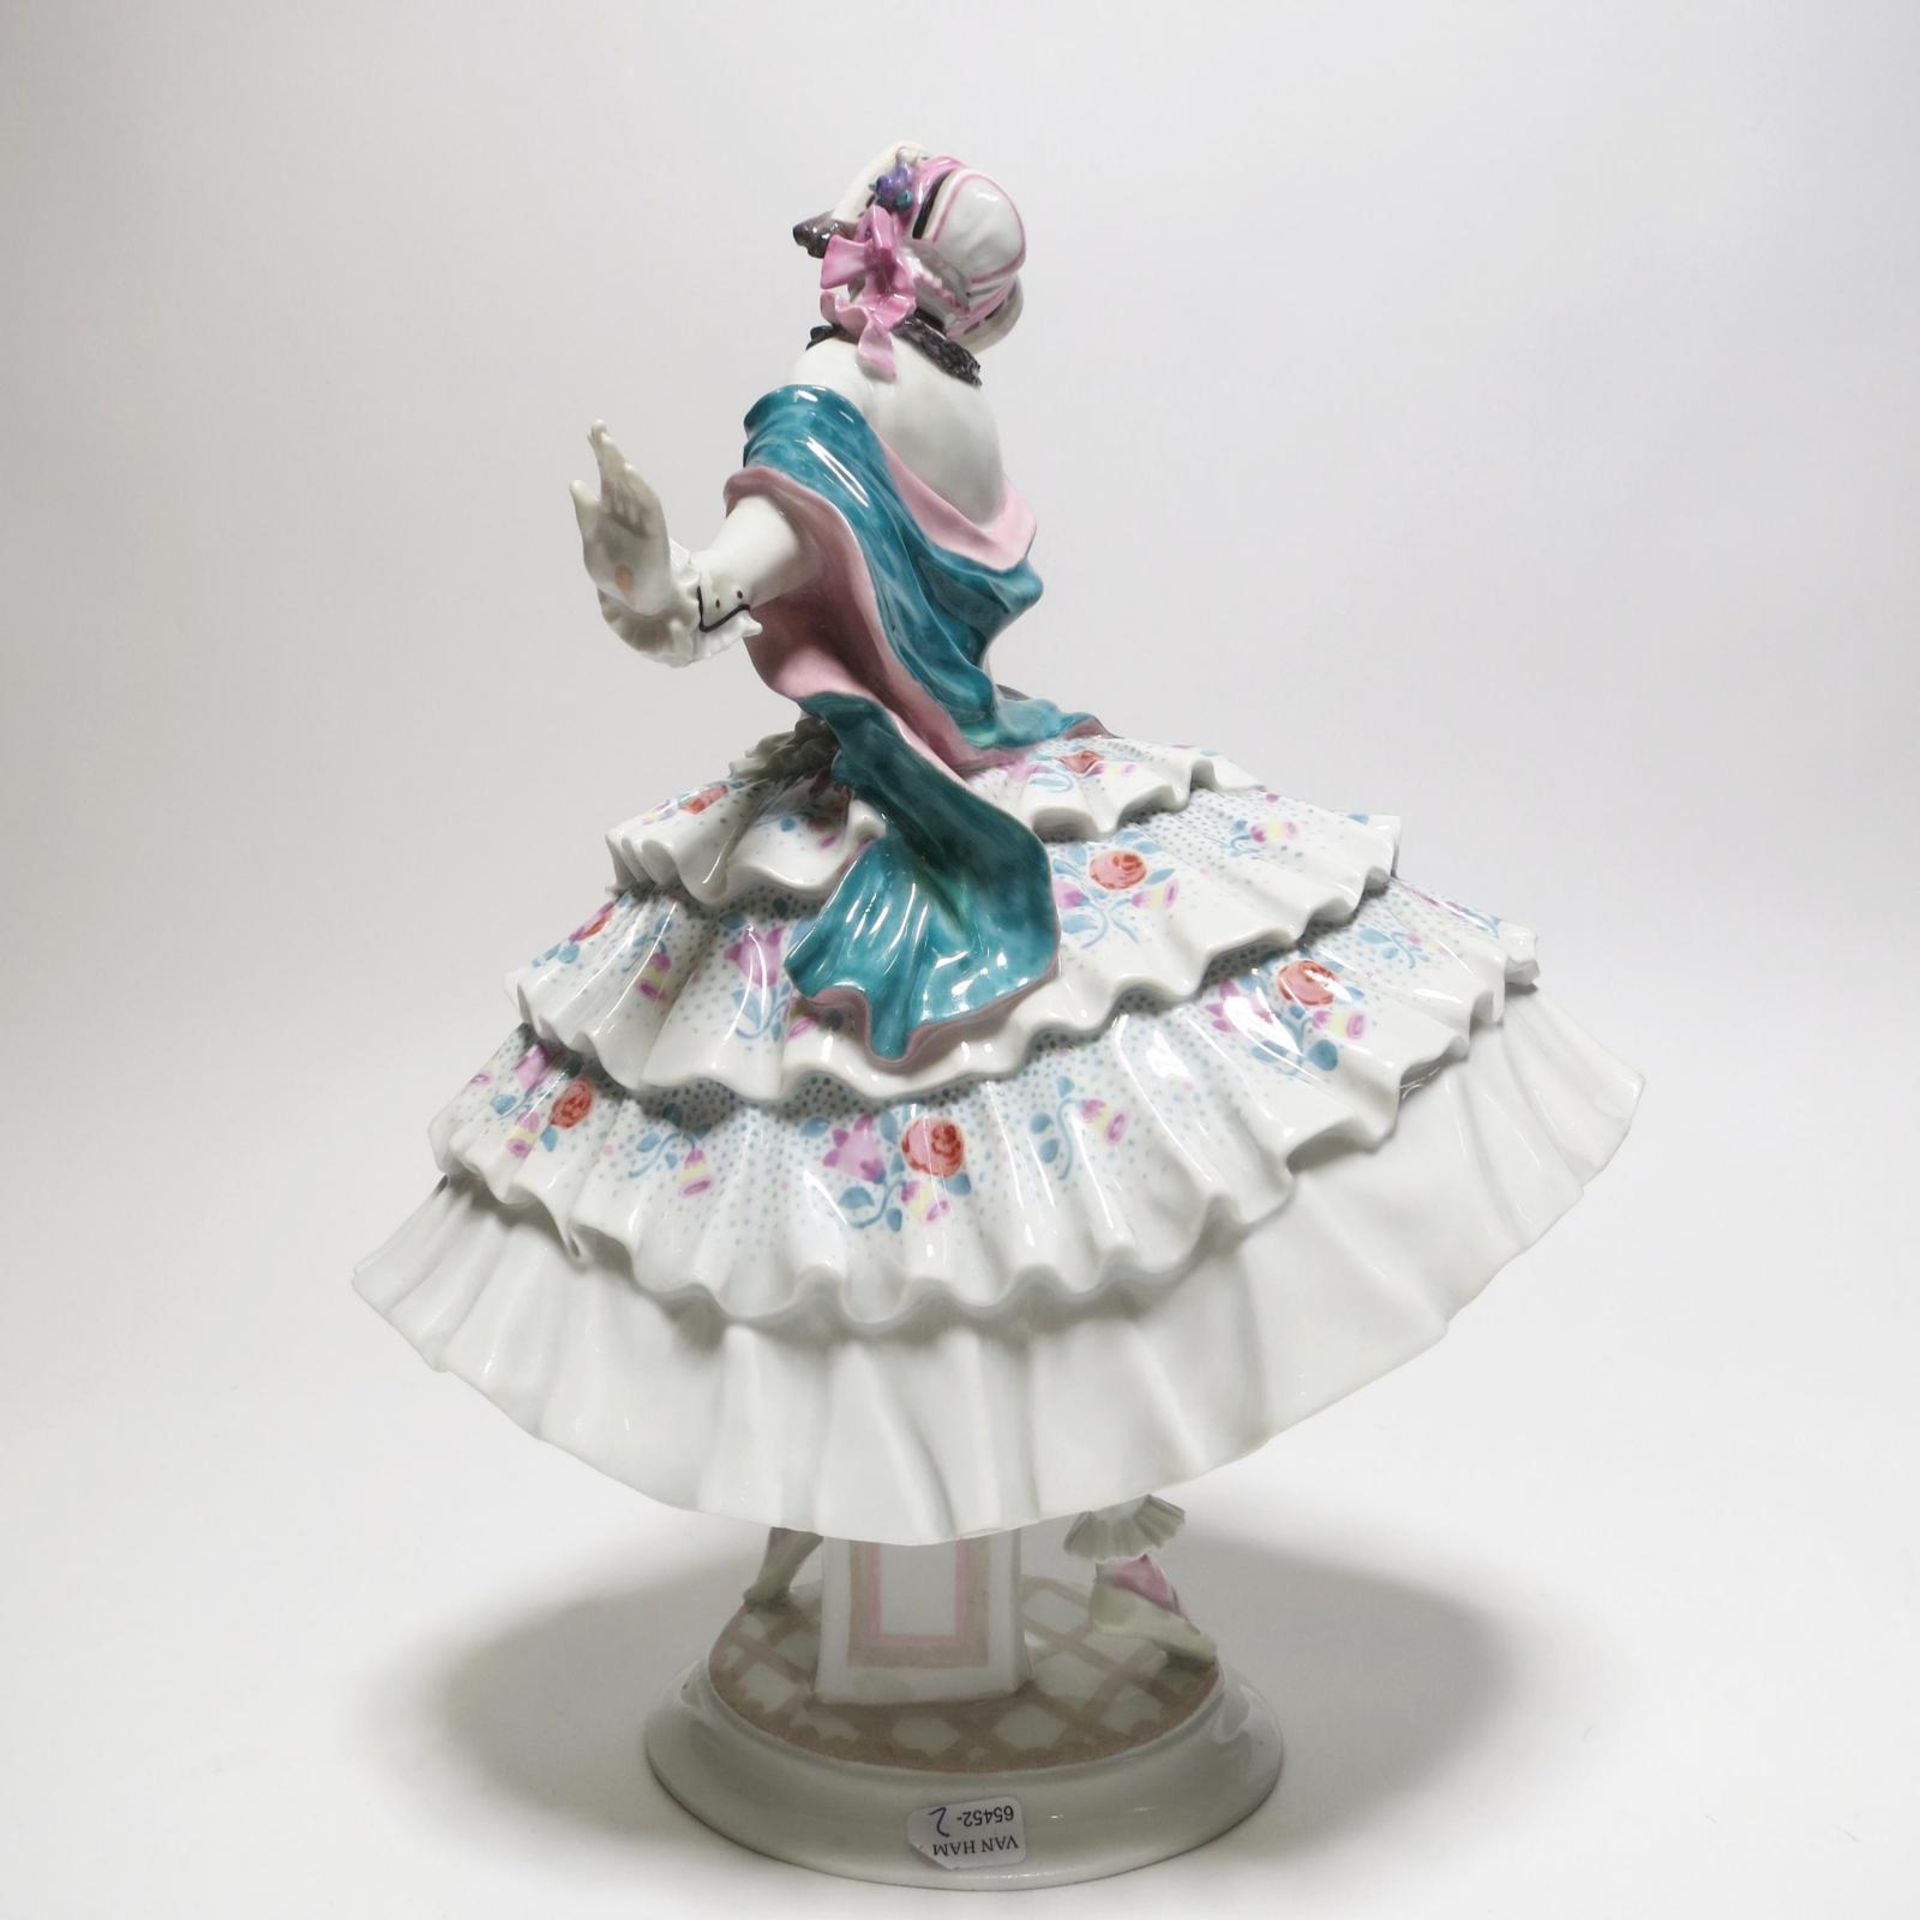 Meissen: PORCELAIN FIGURINES OF THE 'RUSSIAN BALLET' - Image 26 of 49